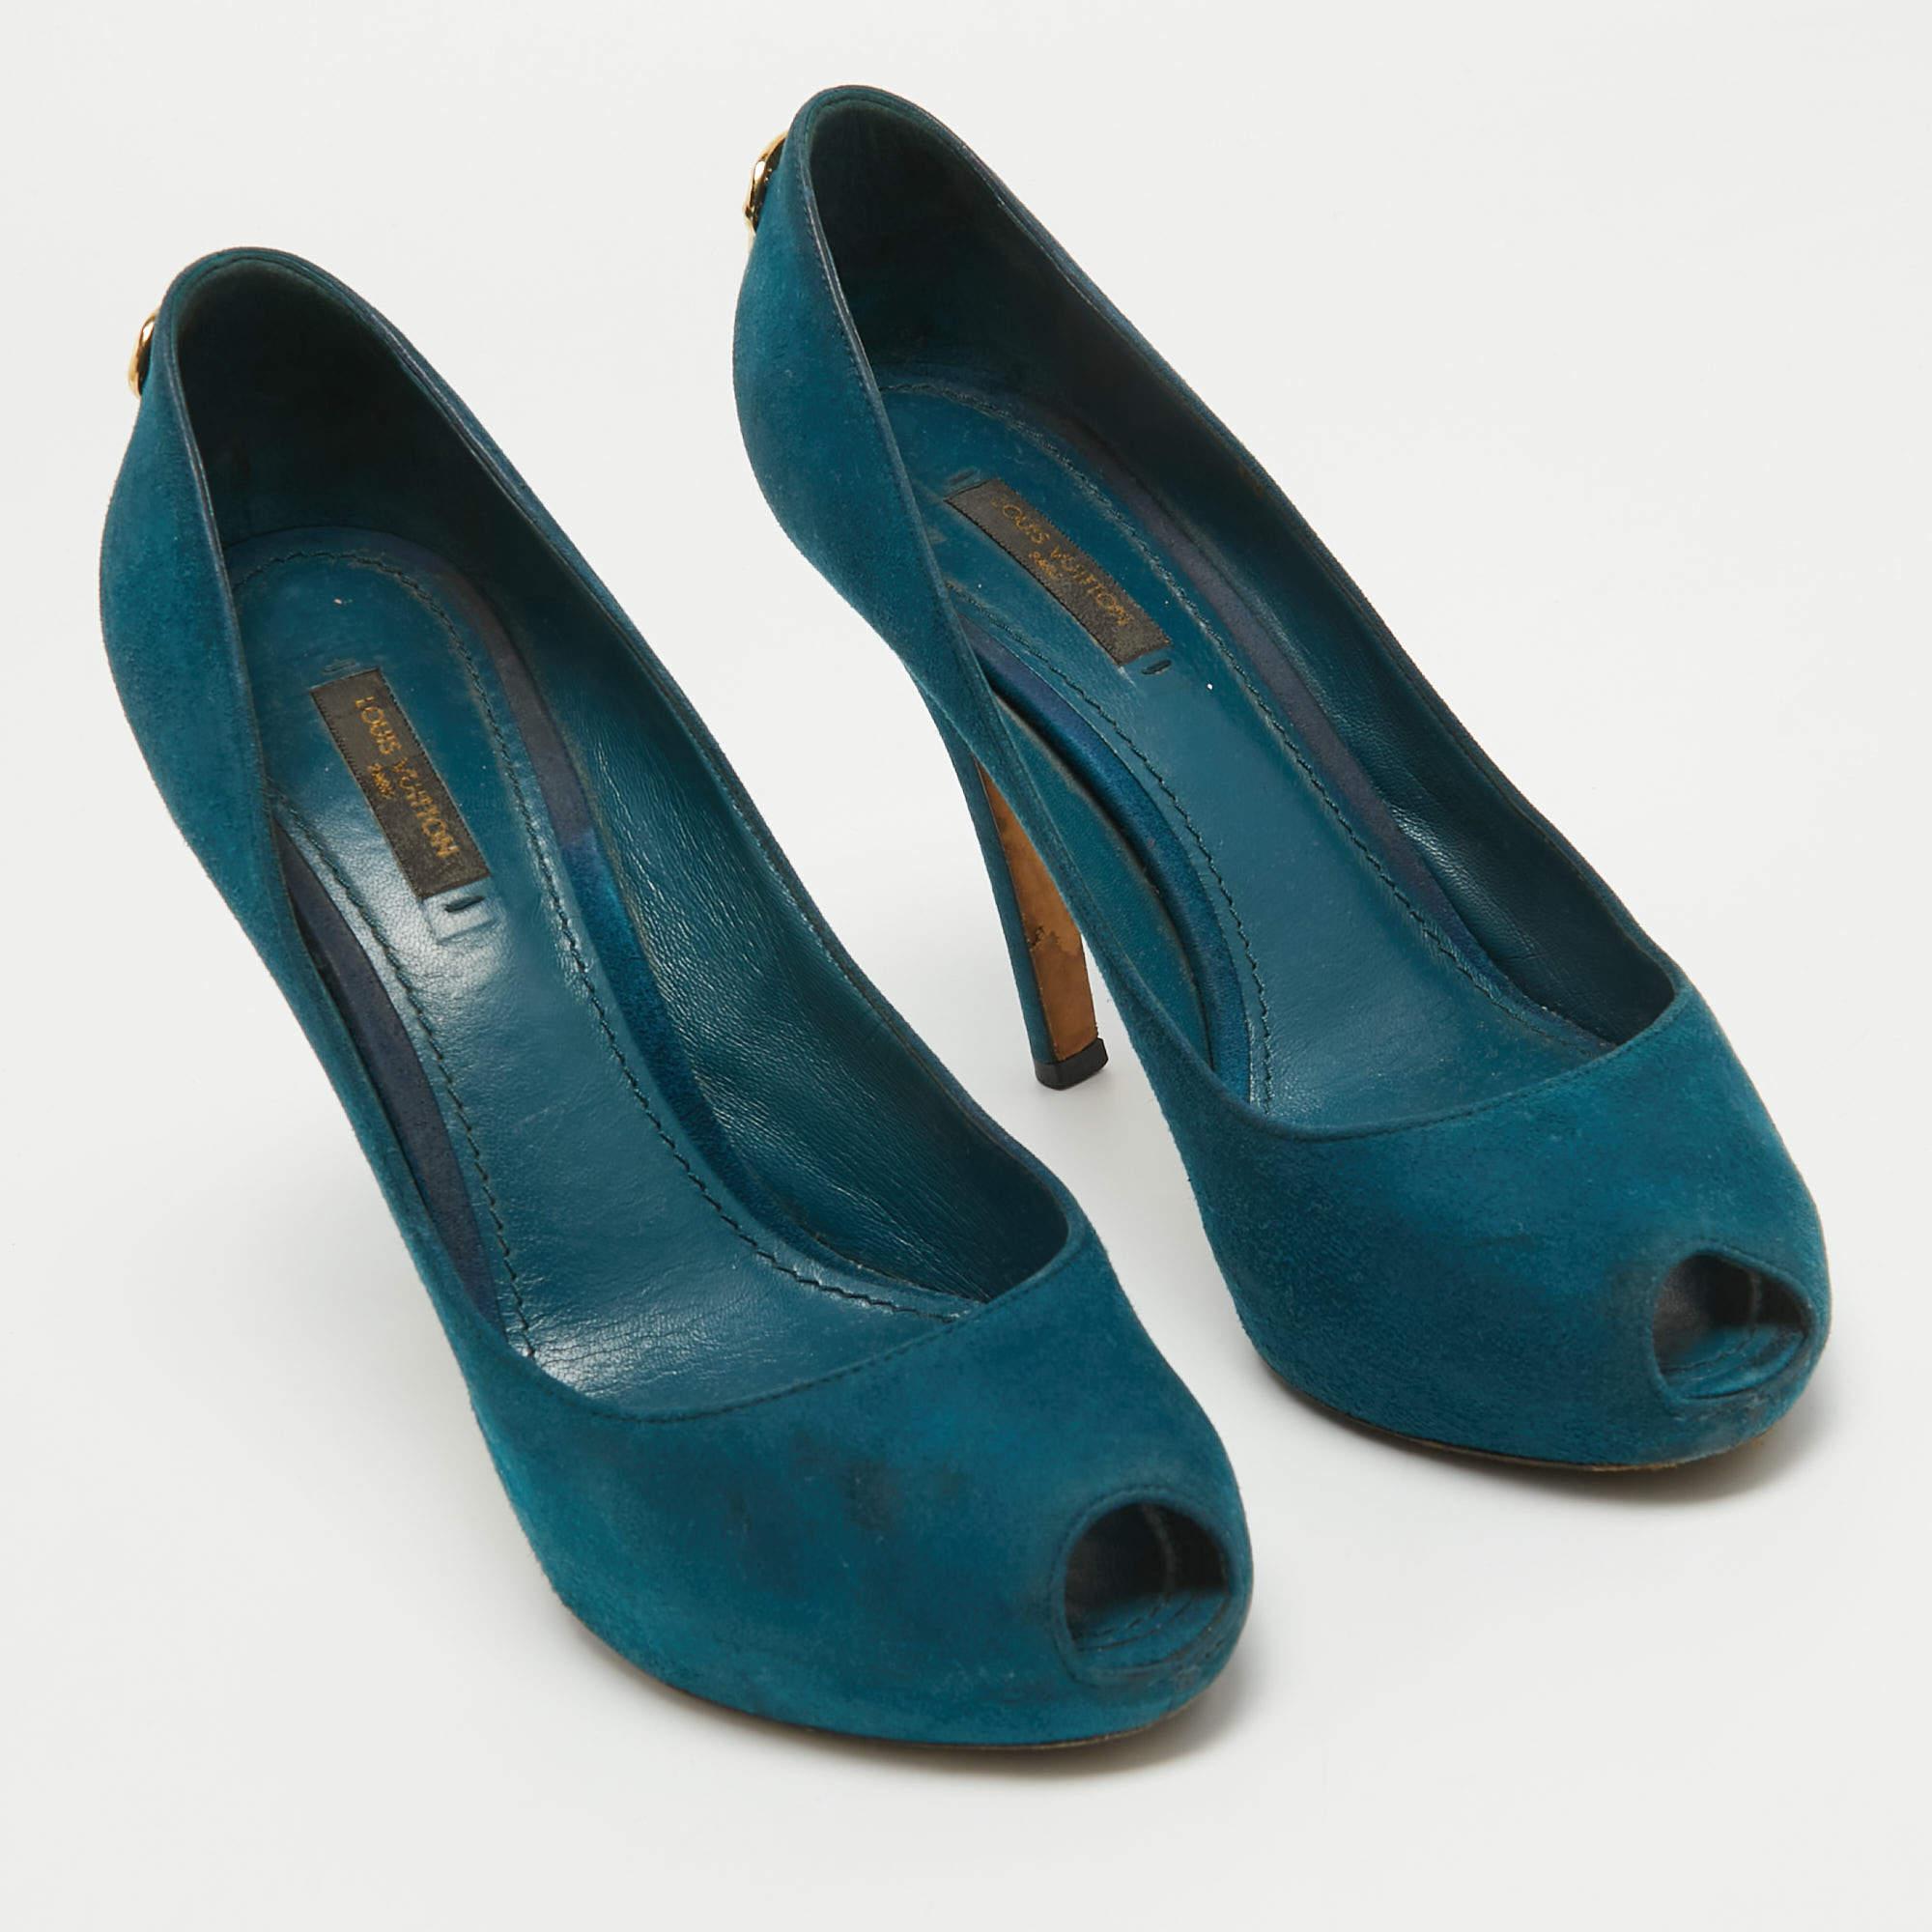 Louis Vuitton Teal Suede Oh Really! Peep Toe Pumps Size 38.5 In Good Condition For Sale In Dubai, Al Qouz 2